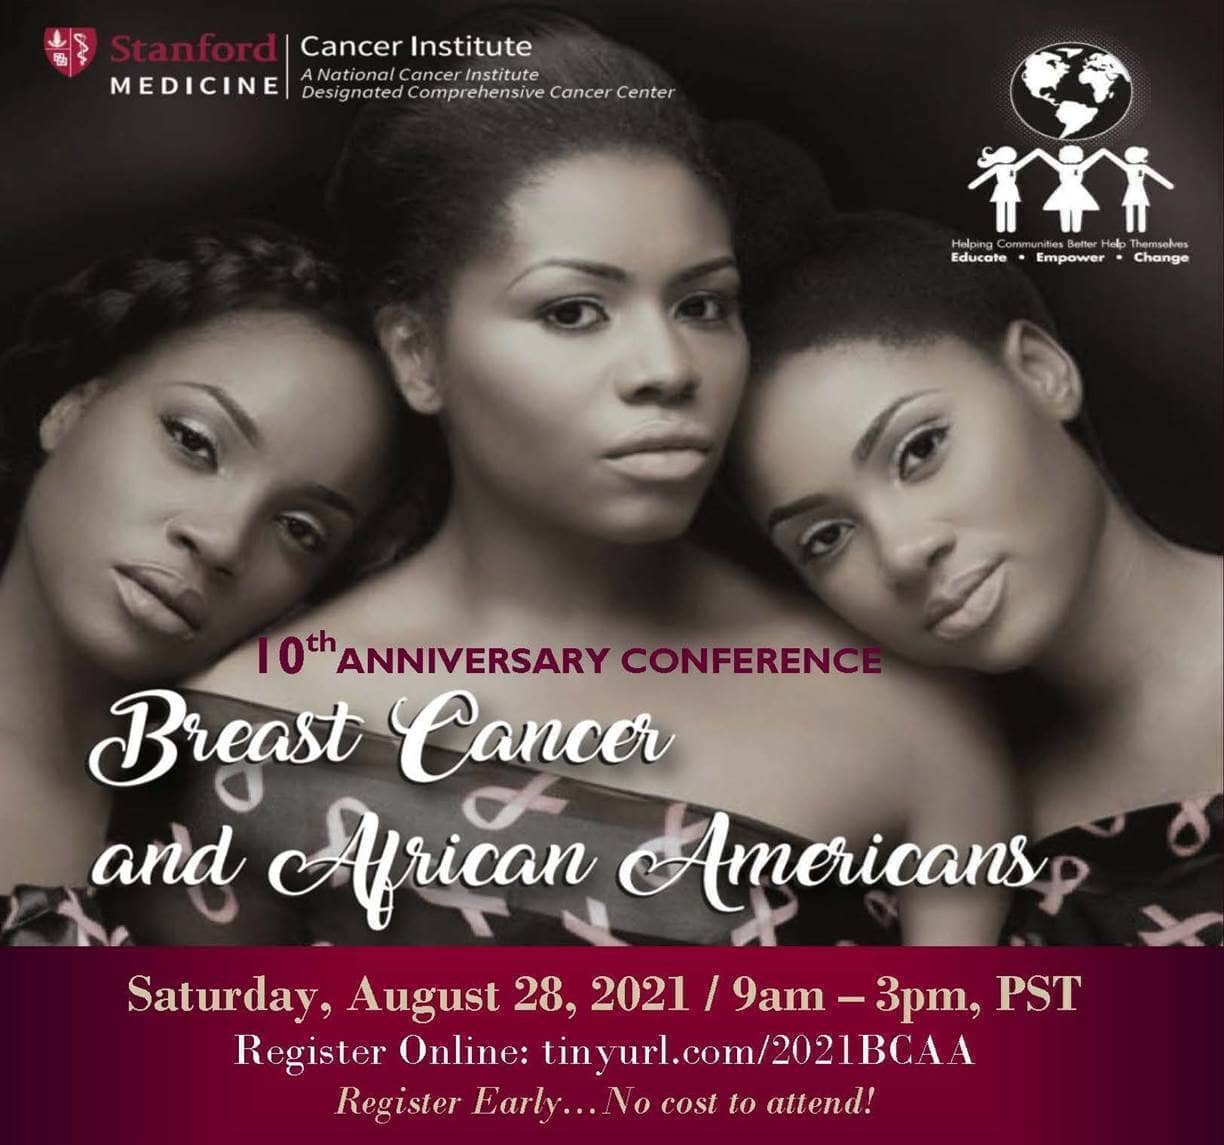 Breast-Cancer-0821, Stanford Cancer Institute’s 10th anniversary conference: Breast Cancer and African Americans, Eye on Education Local News & Views 